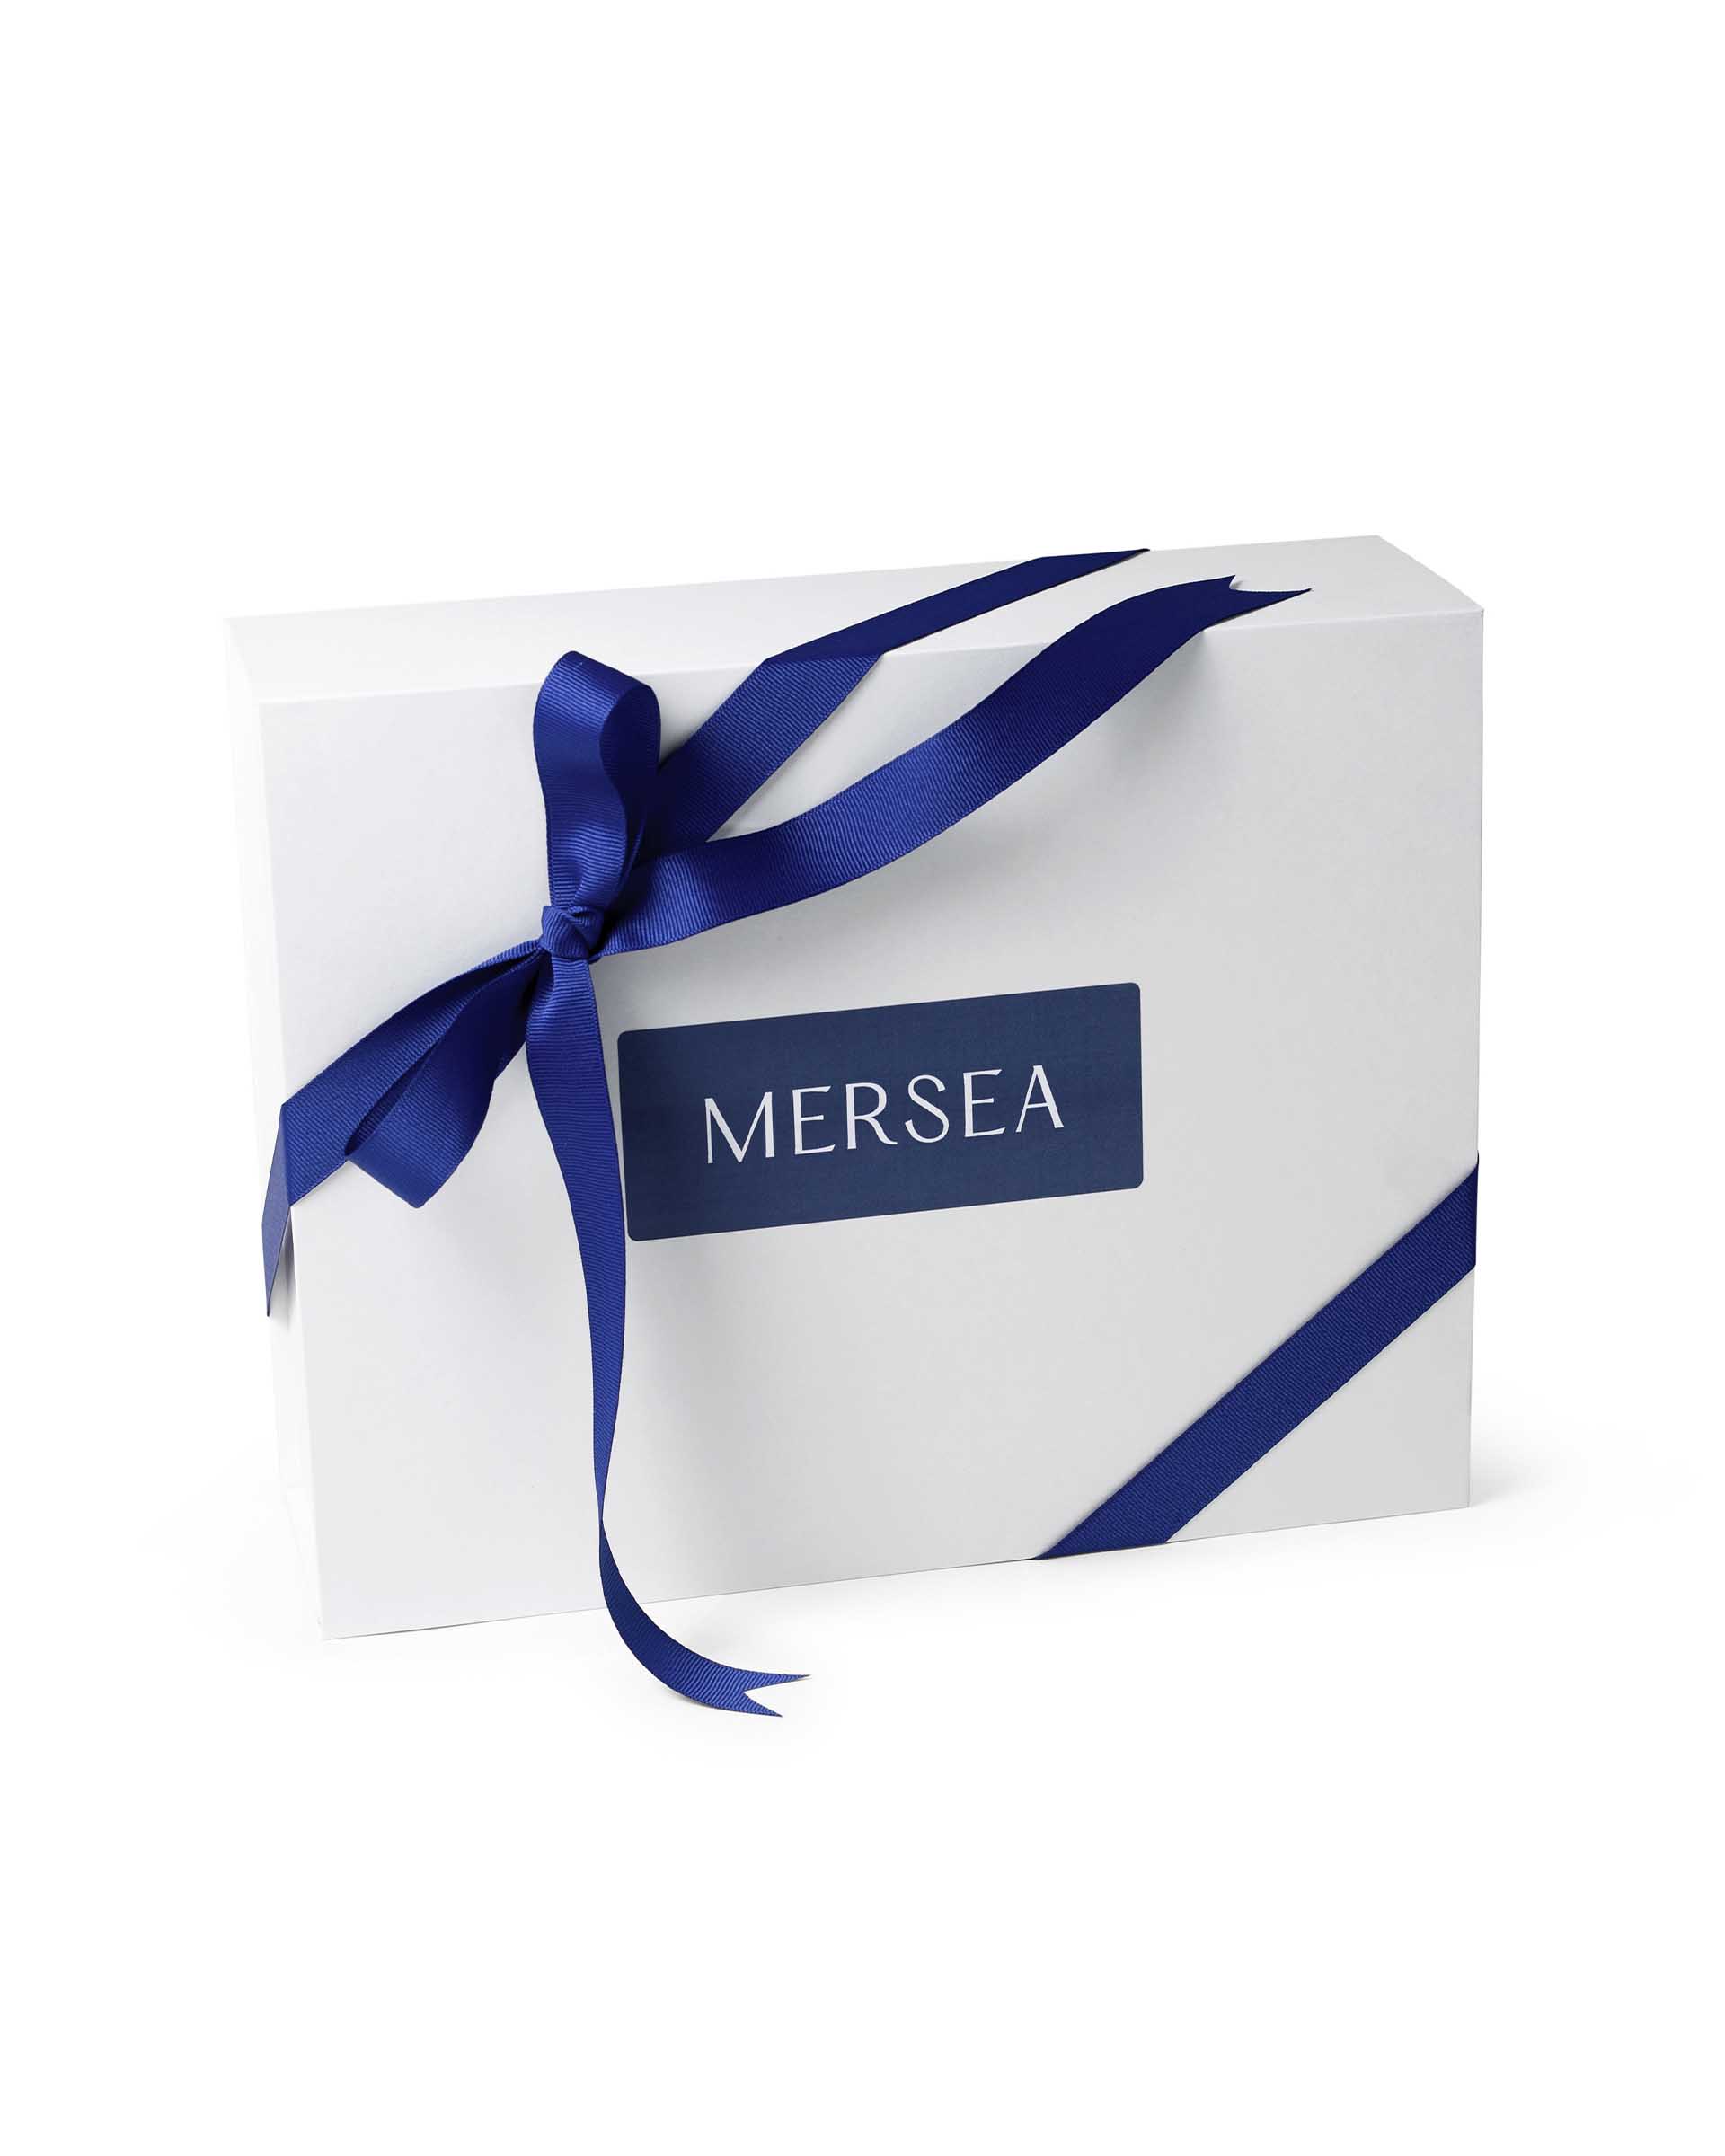 White box with blue bow and blue MERSEA label